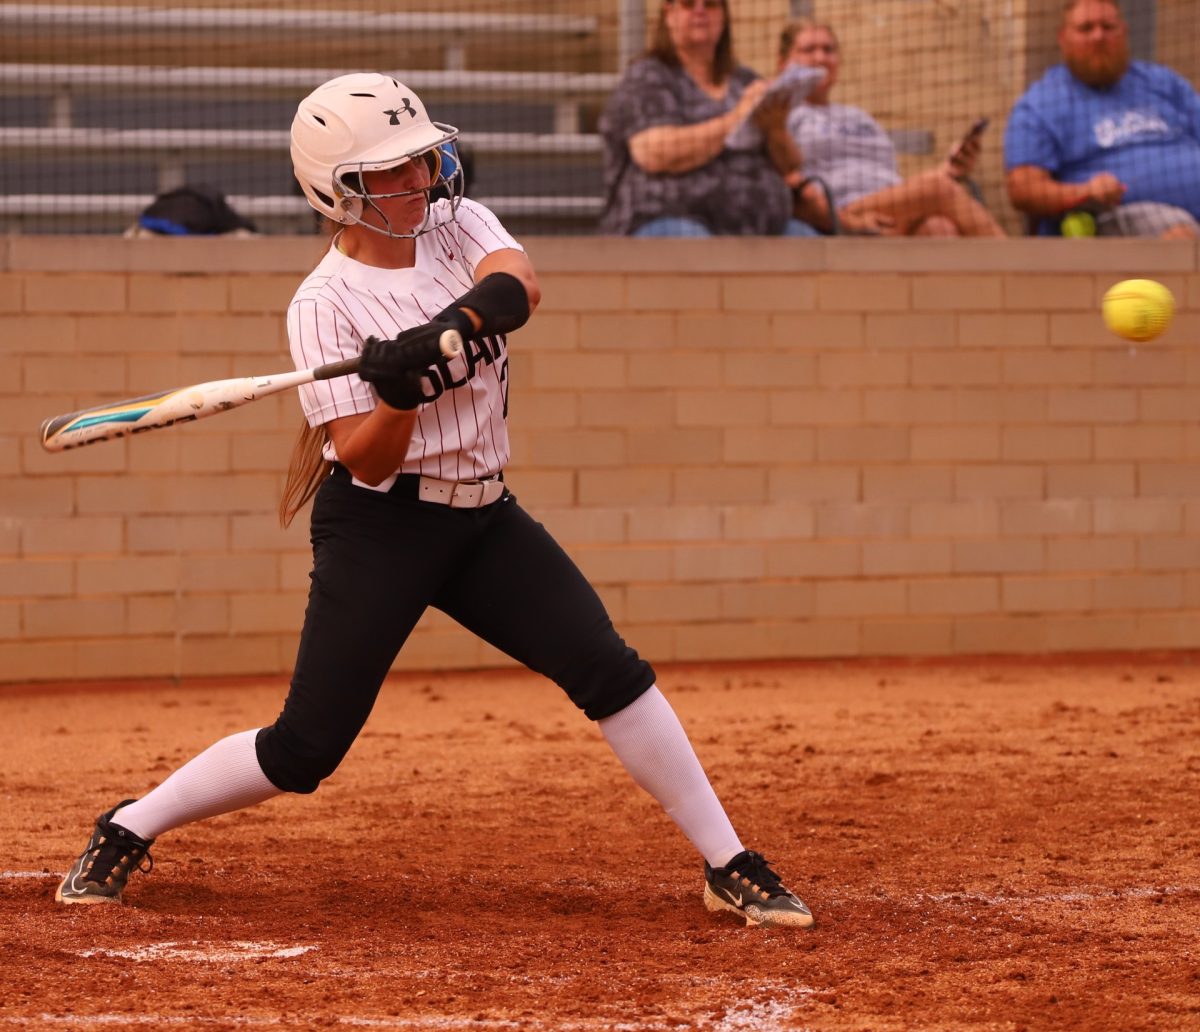 Harlan County catcher Jade collected a pair of hits and two RBI in the Lady Bears 10-0 win over Bell County on Tuesday.